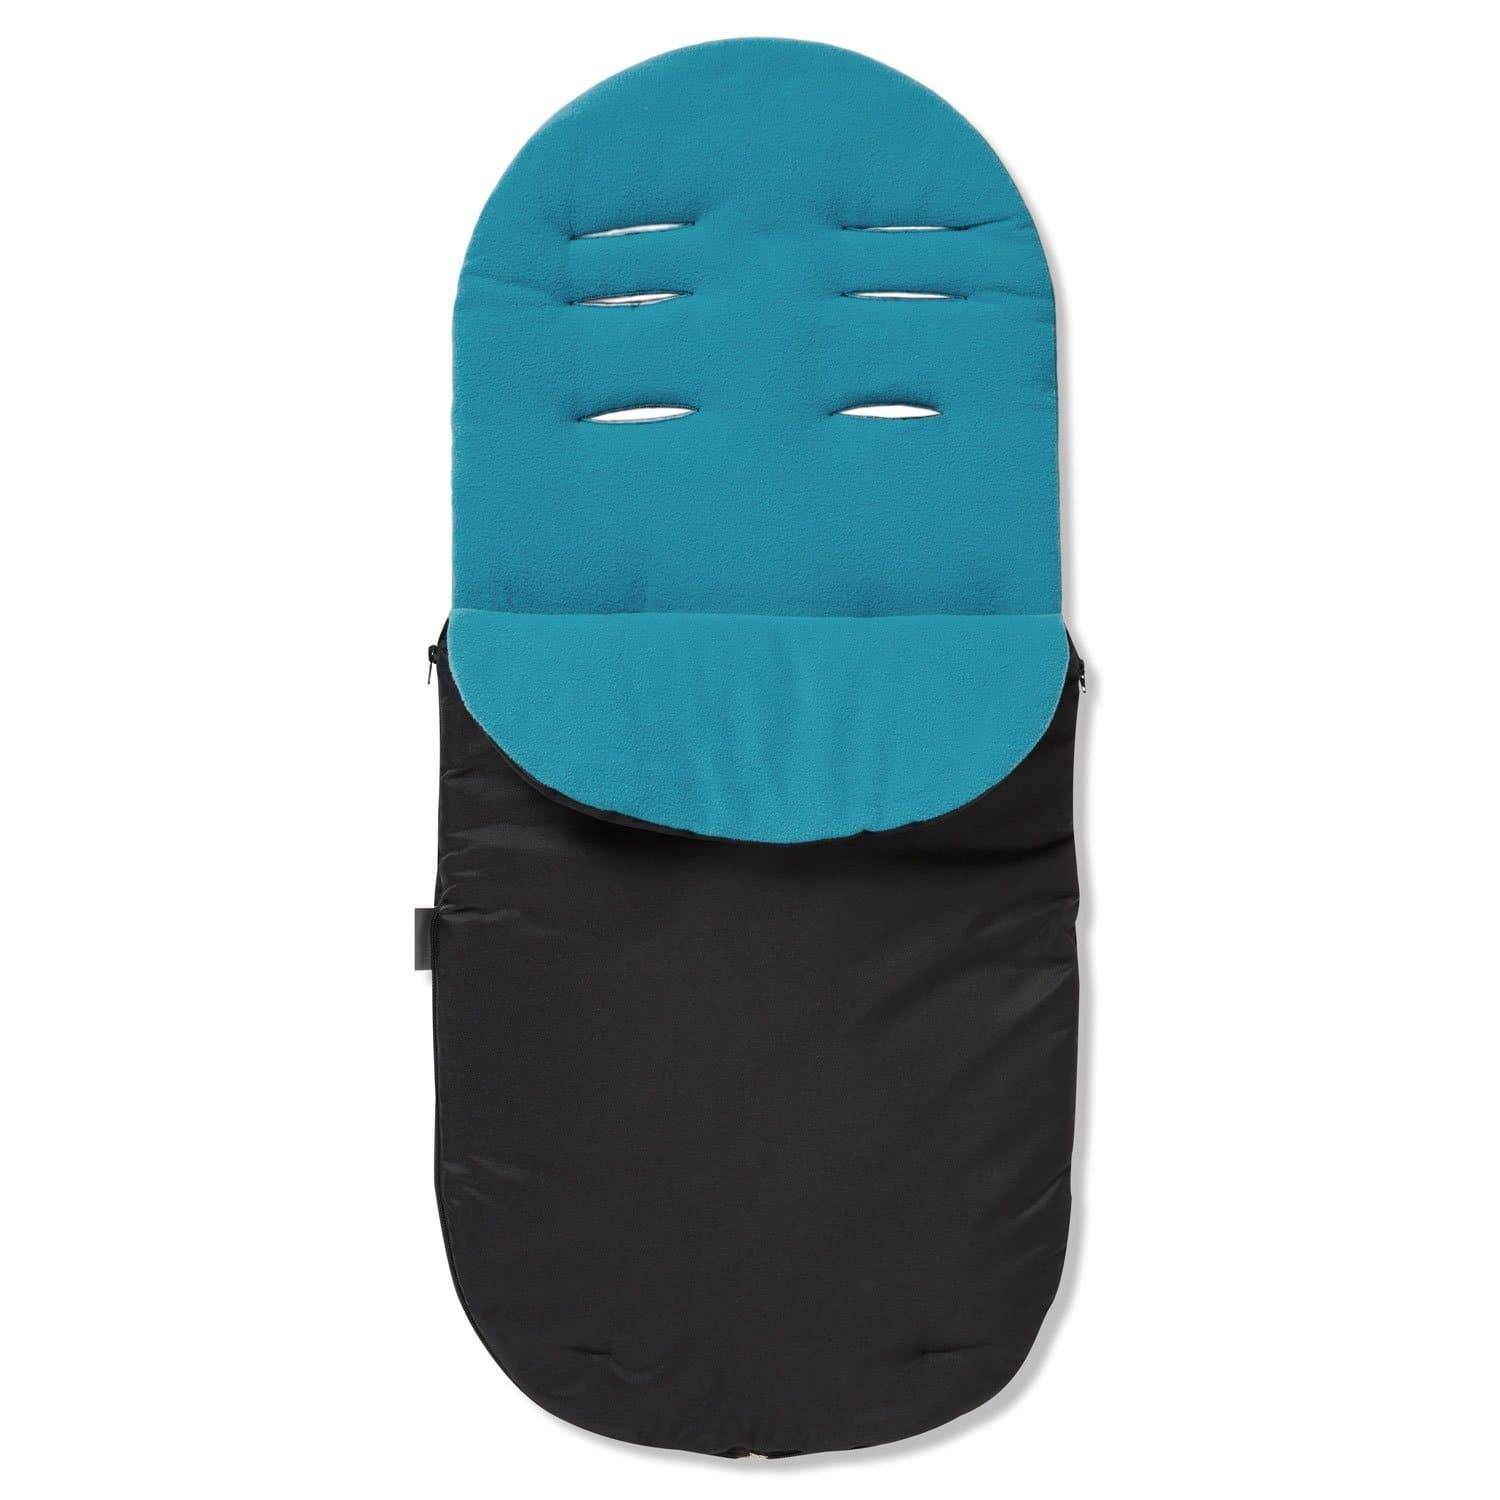 Footmuff / Cosy Toes Compatible with Uppababy - Turquoise / Fits All Models | For Your Little One